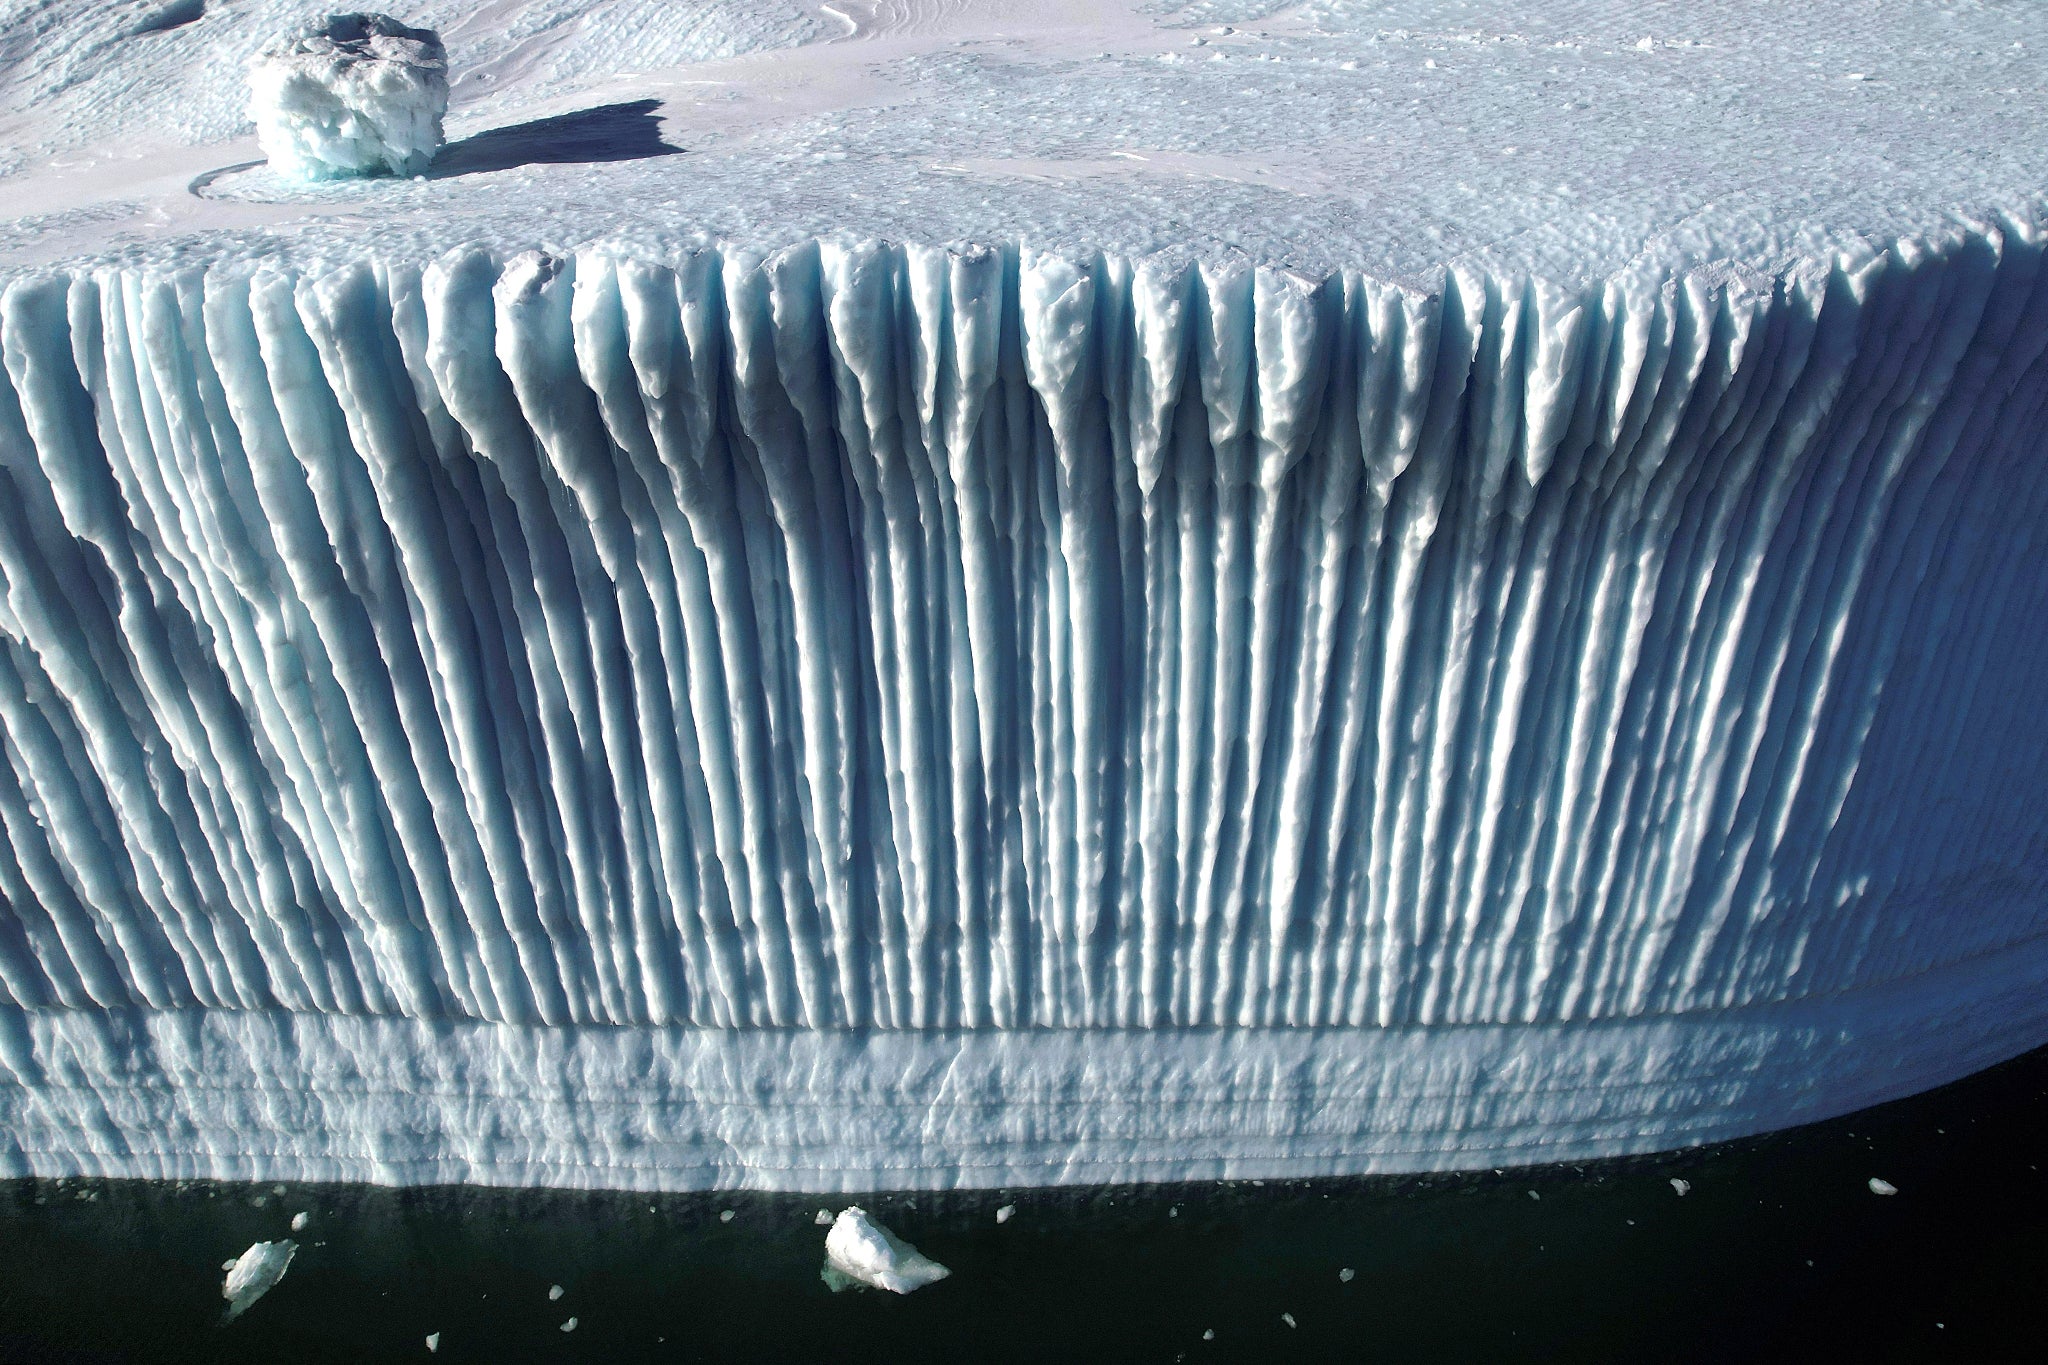 Ice shelf in Greenland. The Arctic is warming 2-3 times faster than the rest of the world